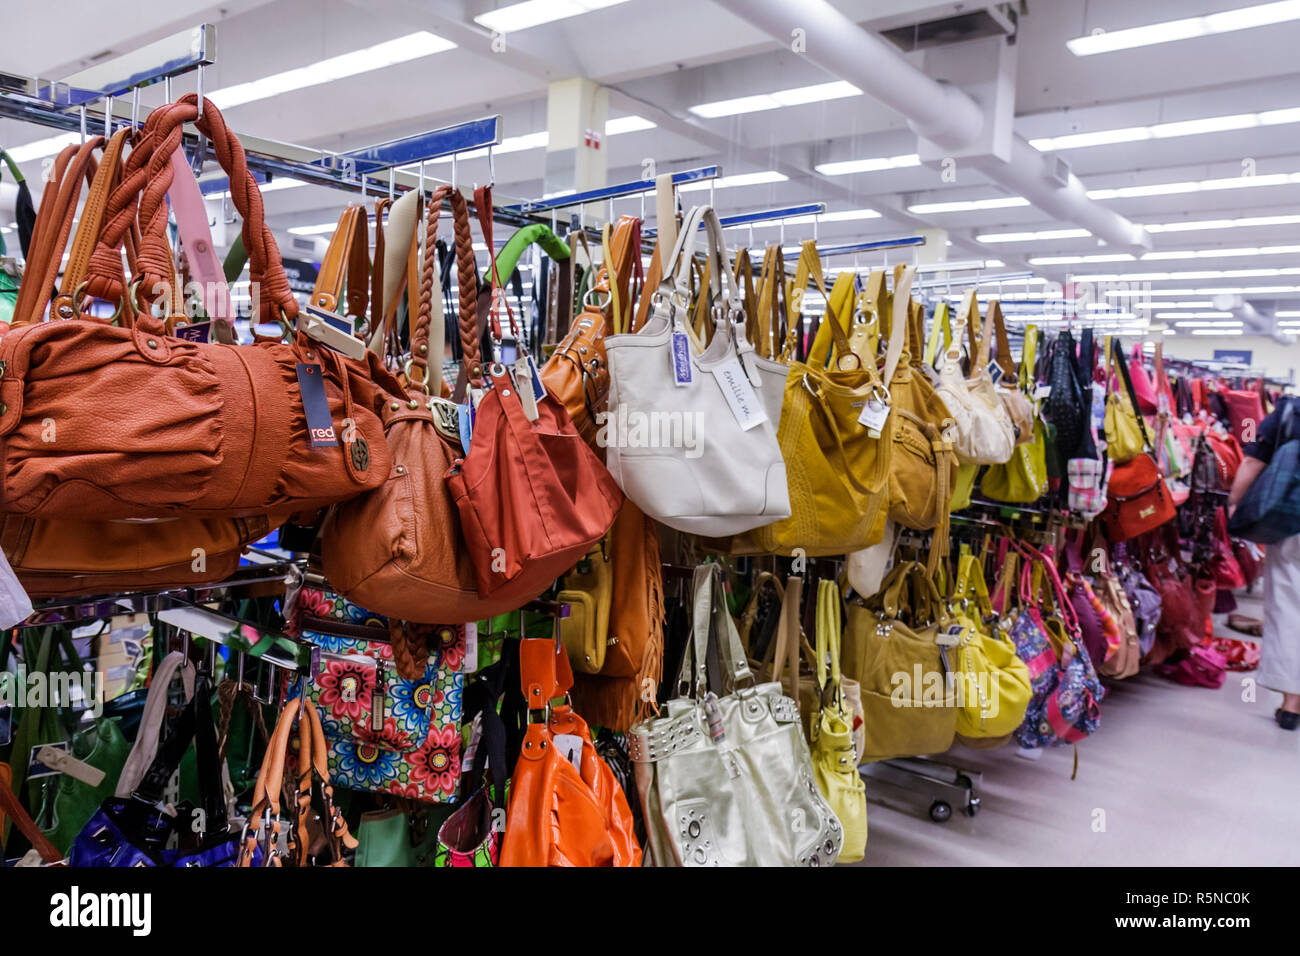 Miami Florida,Marshalls Department Store,discount department store,off price,handbags purses pocketbookx,design,luxury,well dressed,variety,shopping s Stock Photo